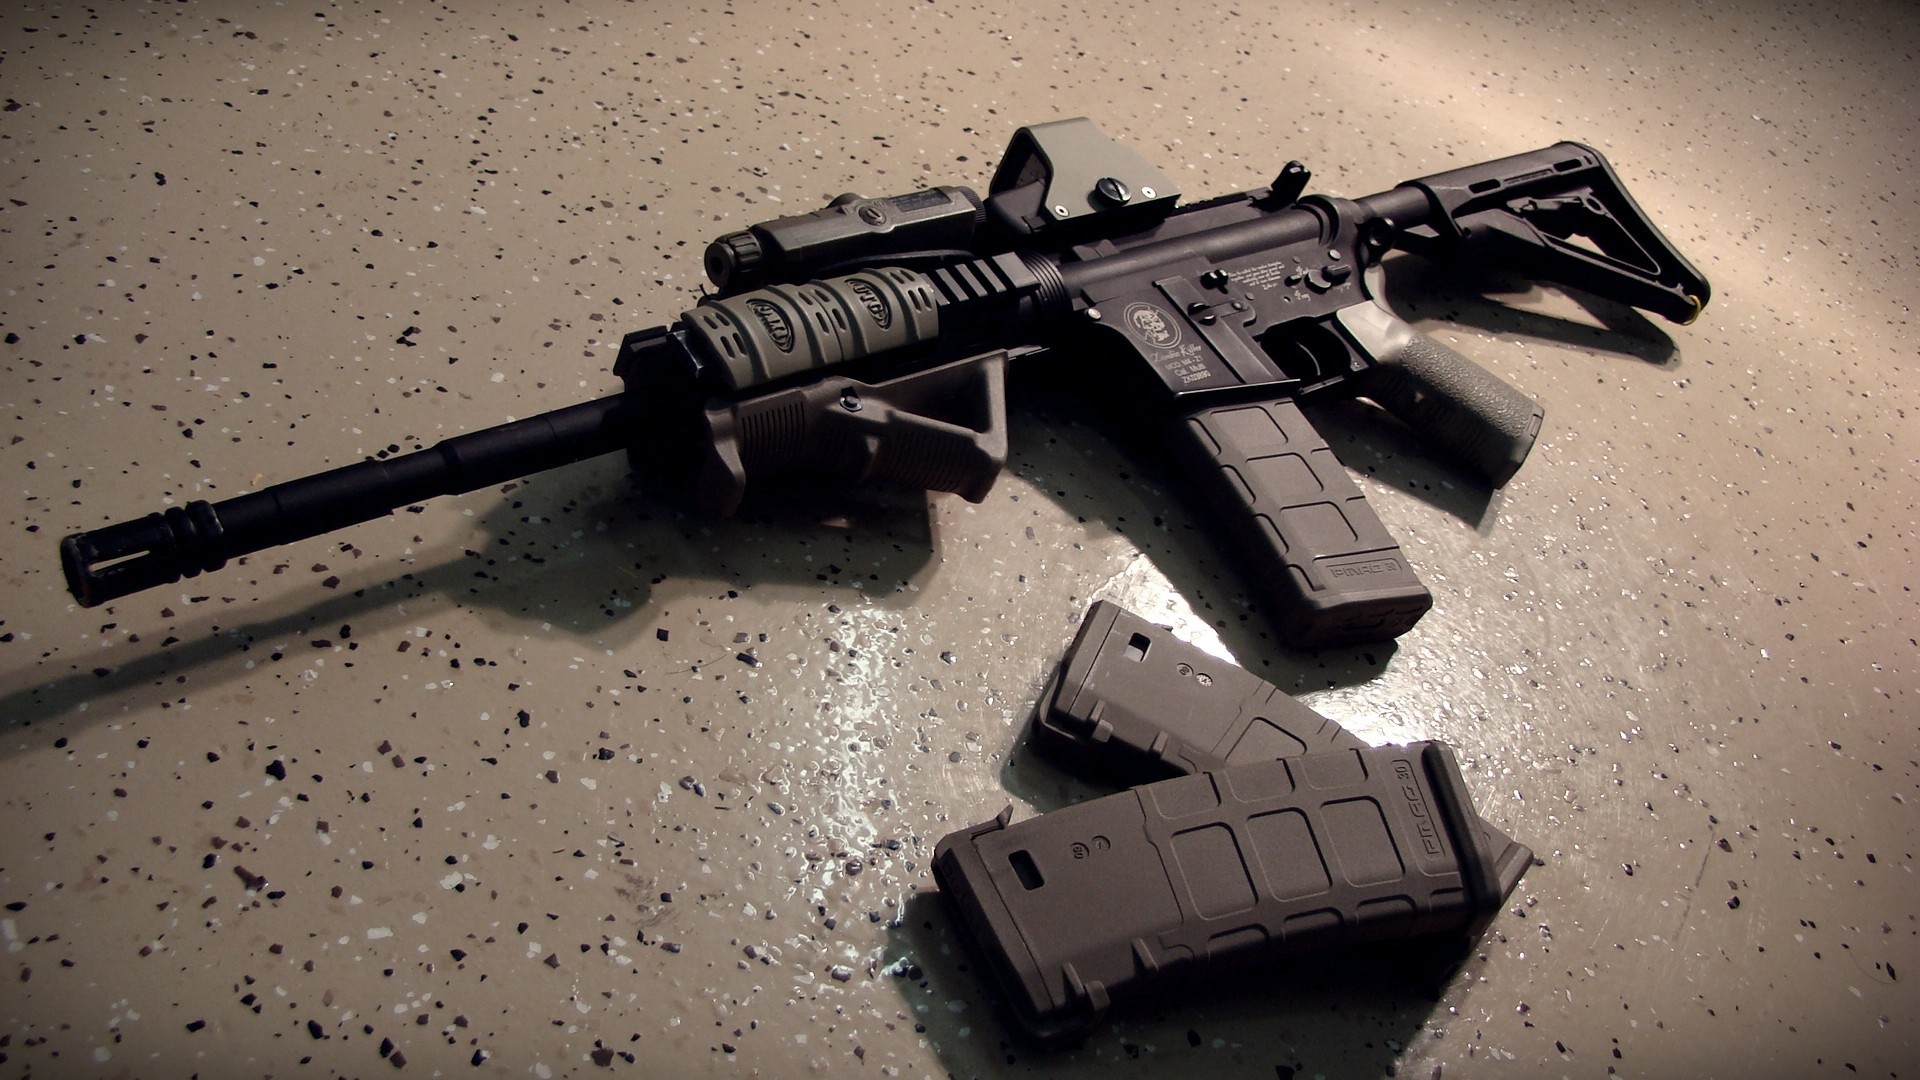 1900 Ar 15 Stock Photos Pictures  RoyaltyFree Images  iStock  Ar 15  vector Ar 15 rifle